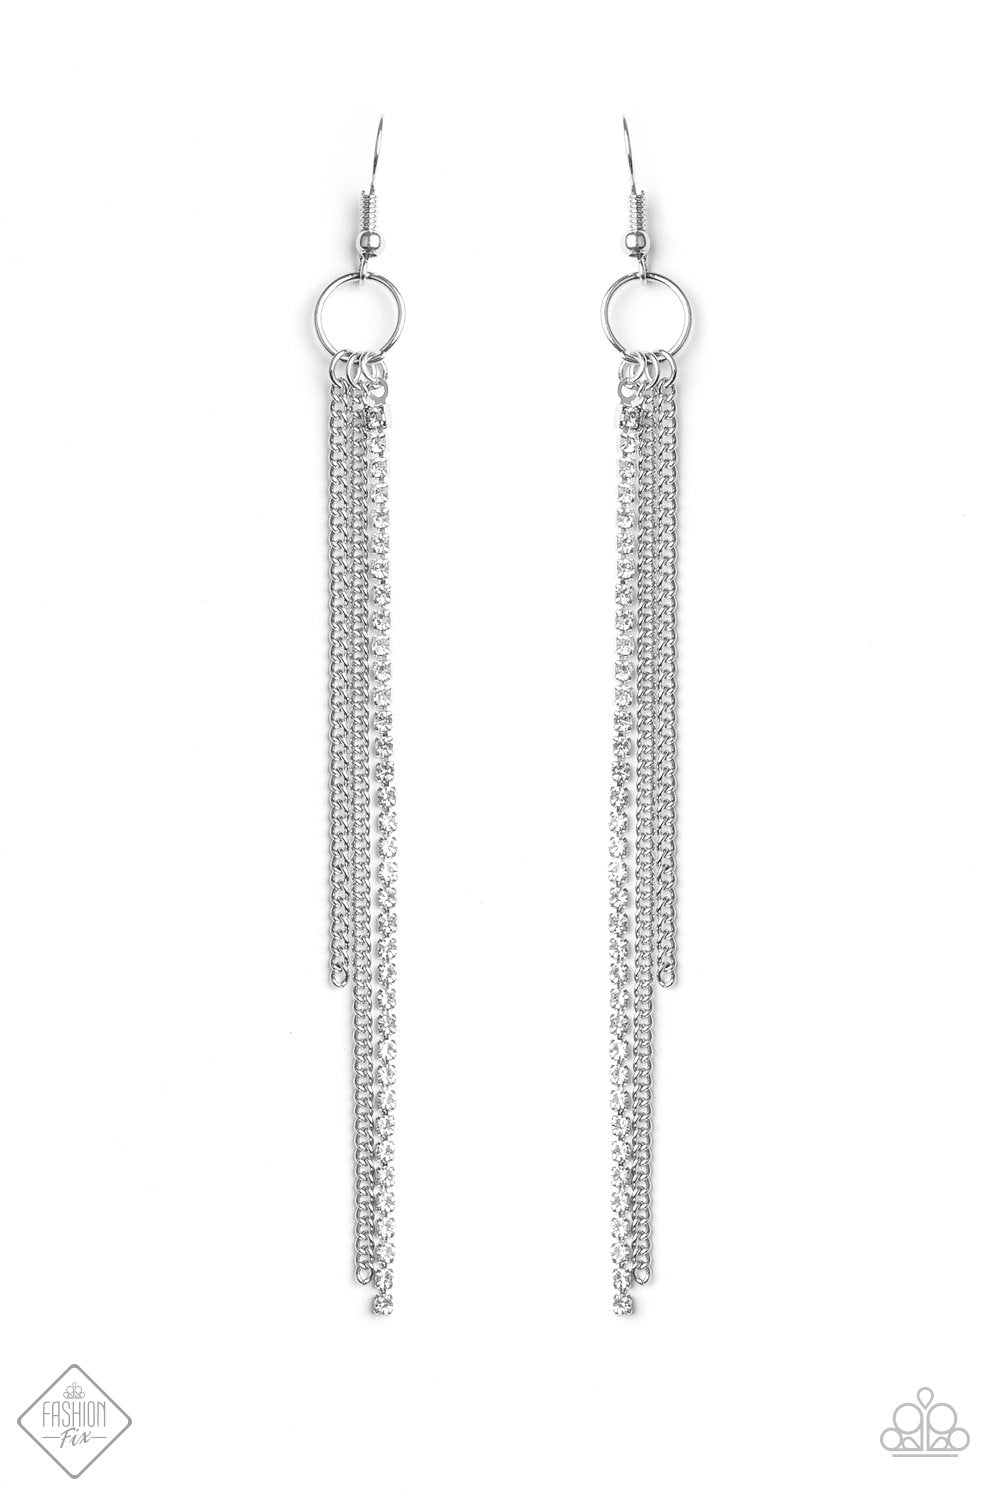 7 Days a SLEEK Silver and White Rhinestone Chain Earrings - Paparazzi Accessories-CarasShop.com - $5 Jewelry by Cara Jewels